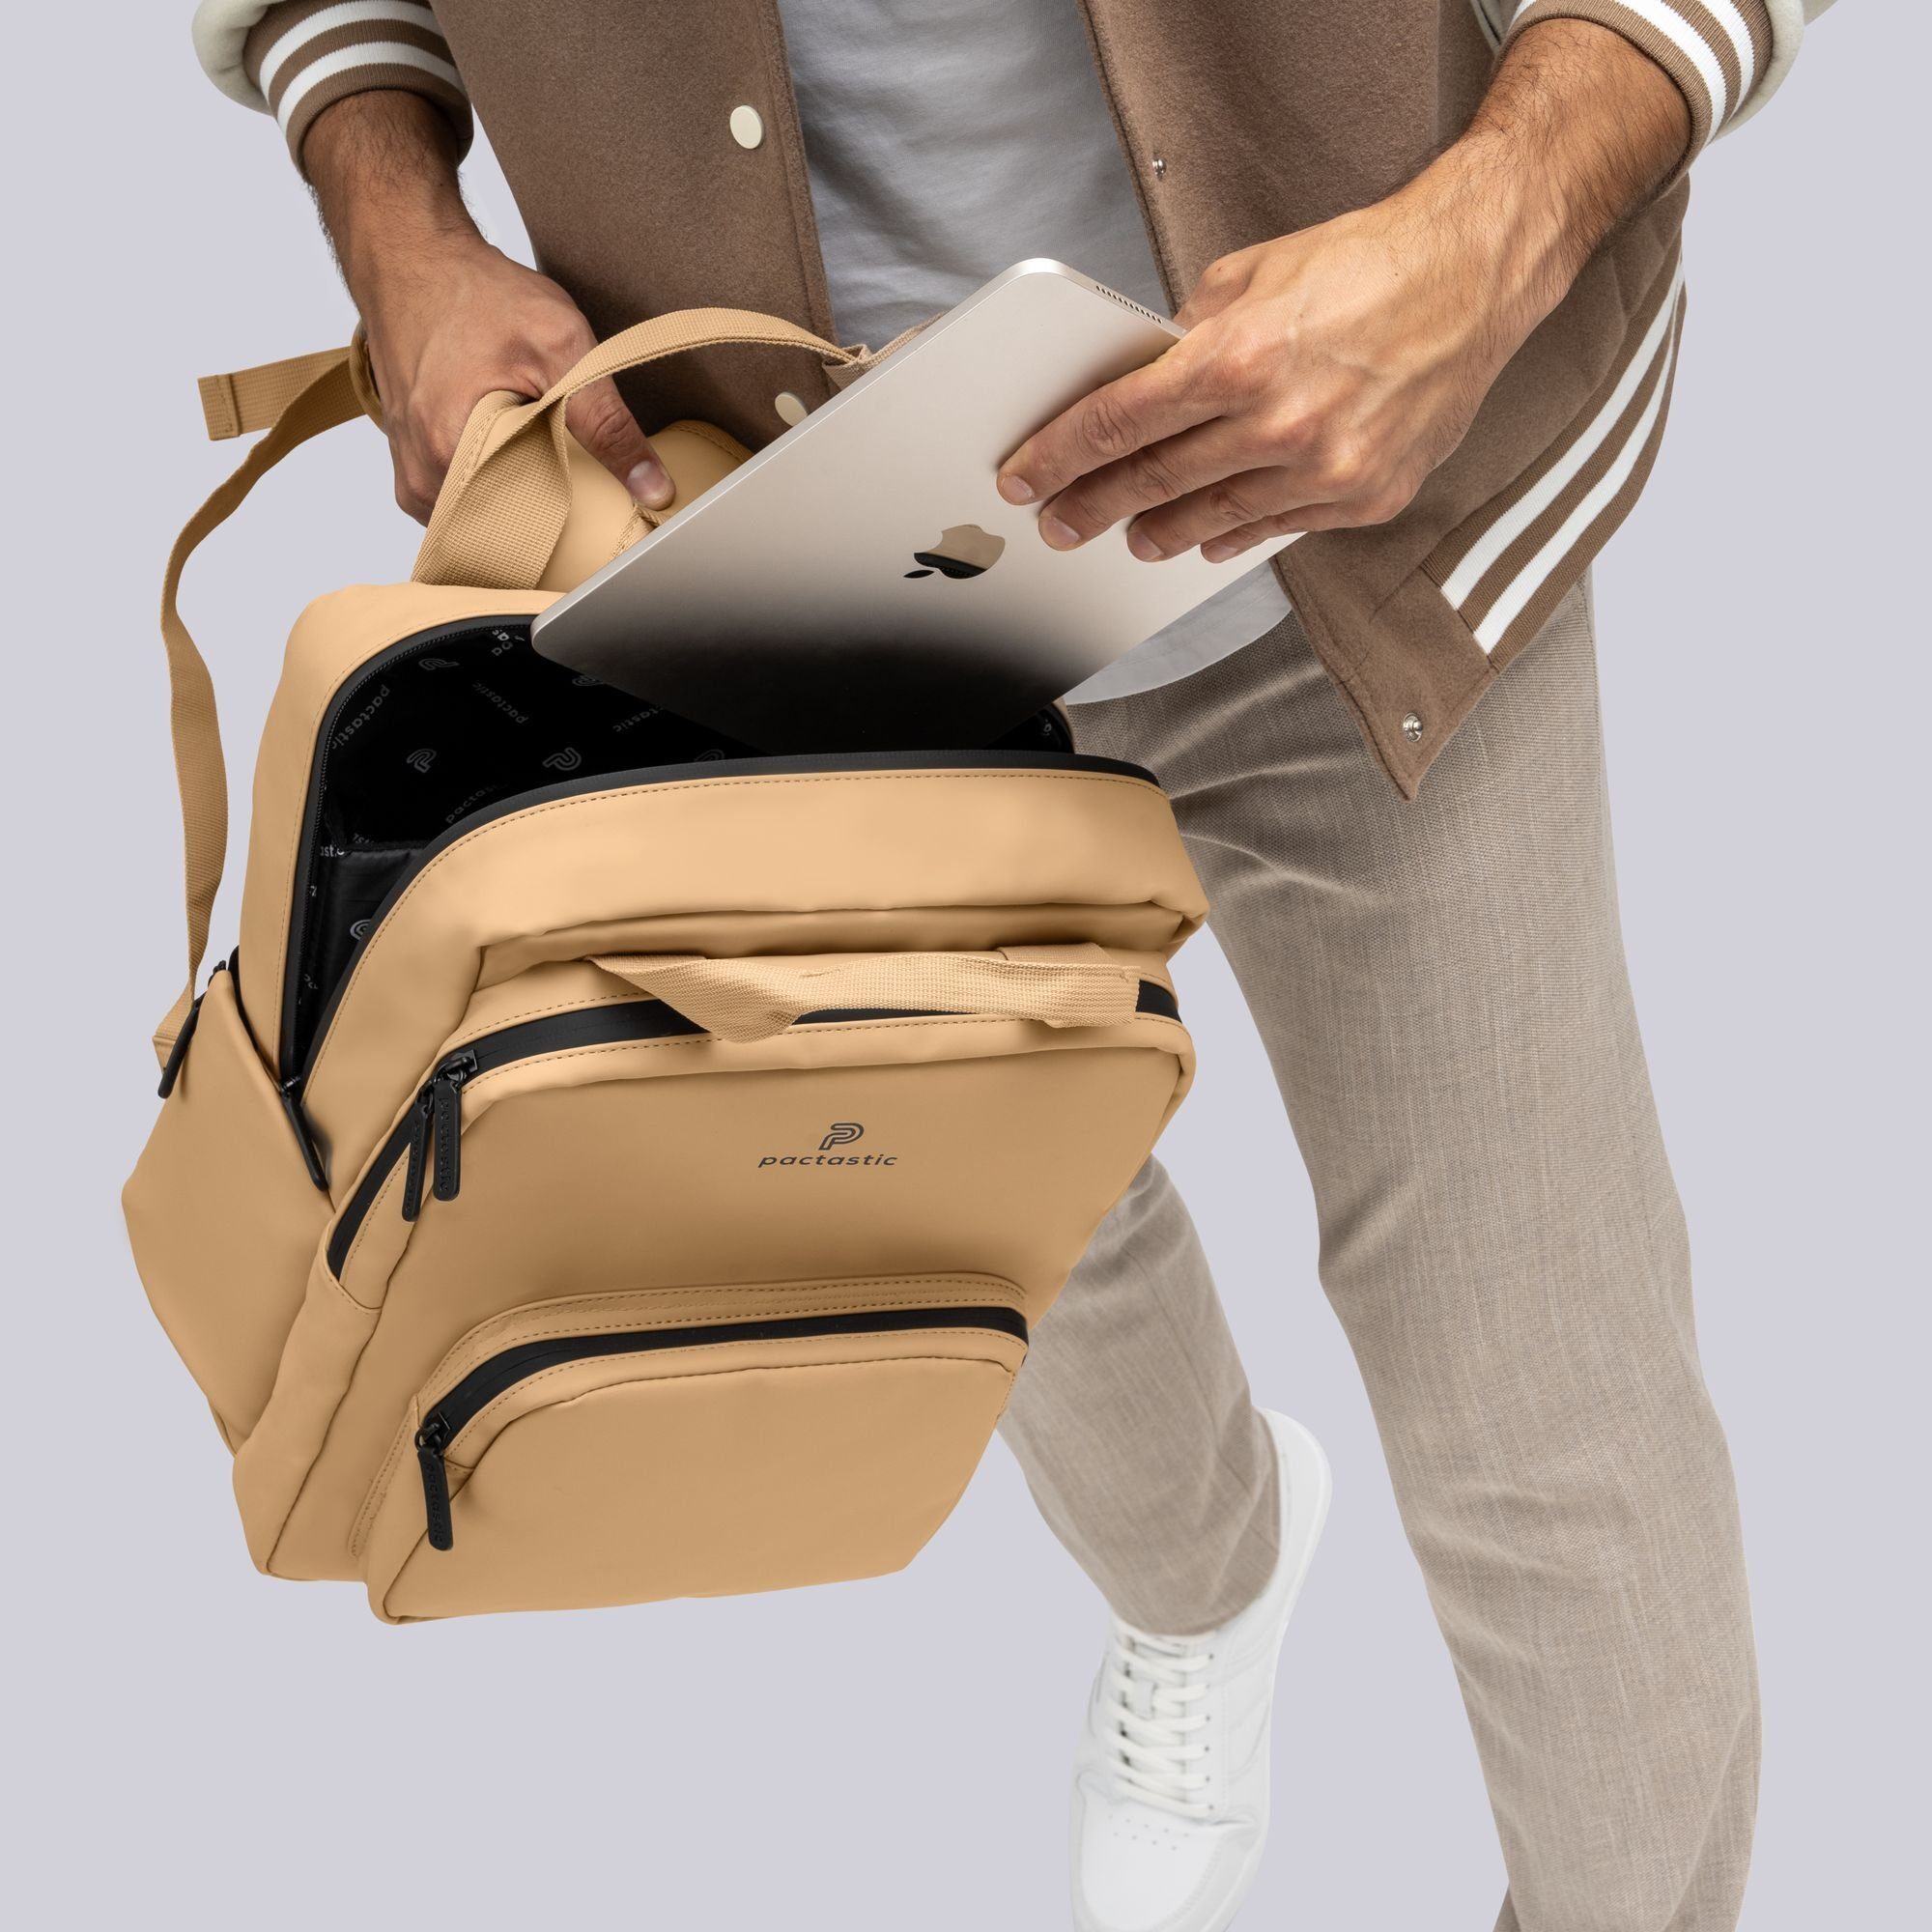 Collection, Daypack beige Pactastic Veganes Urban Tech-Material